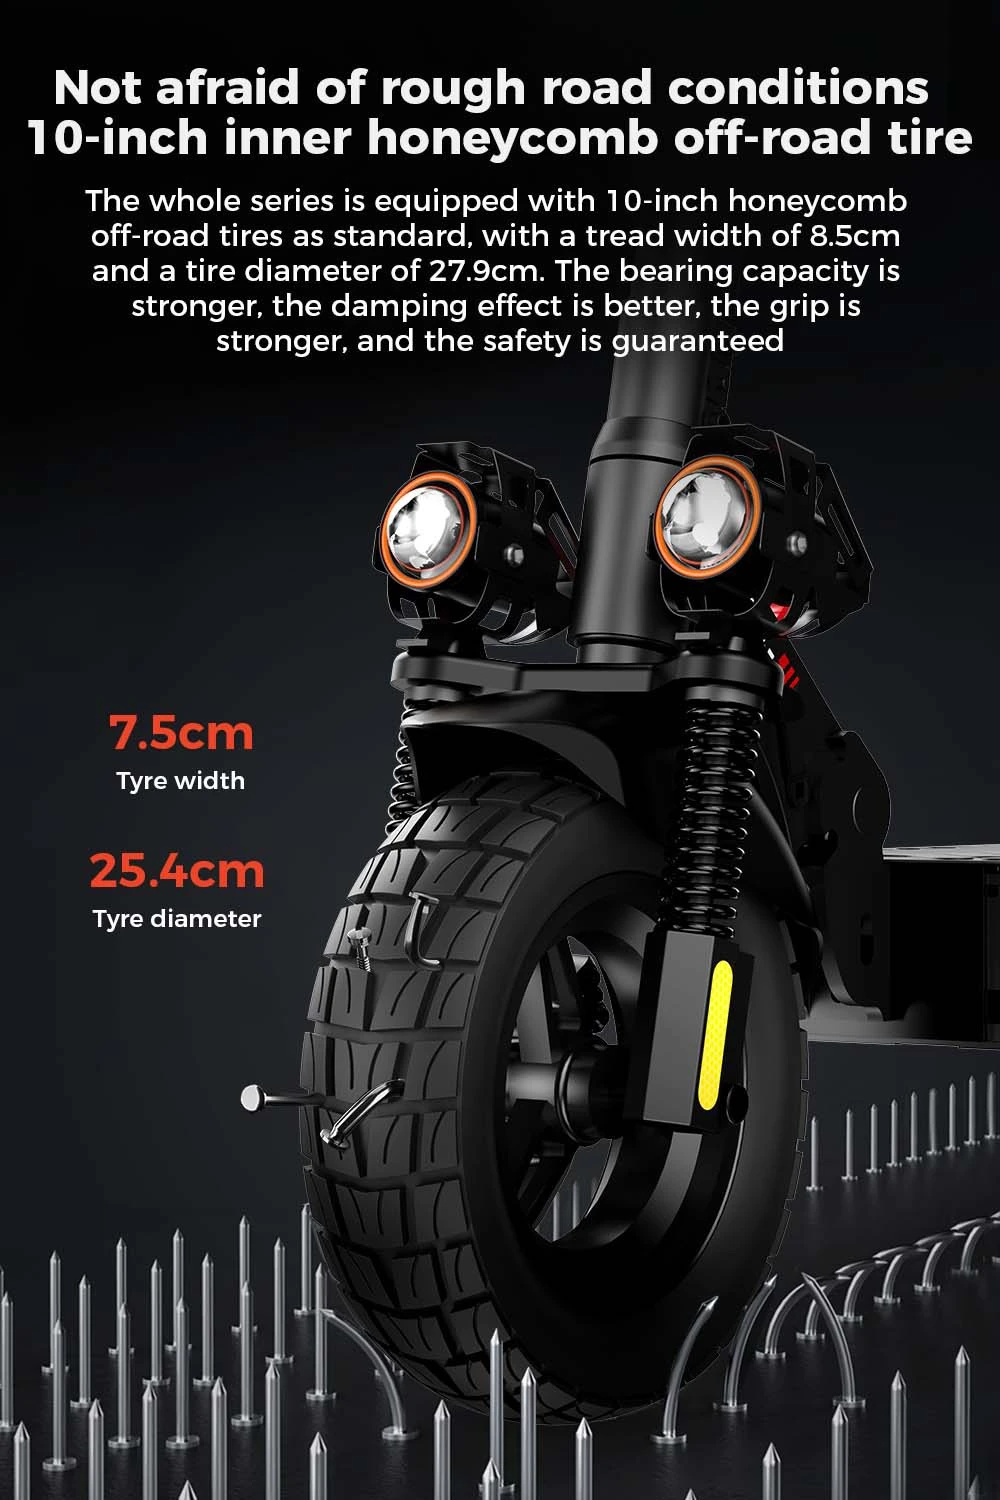 https://img.gkbcdn.com/d/202303/iScooter-IX4-Electric-Scooter-10---Honeycomb-Tires-519918-20._p1_.jpg